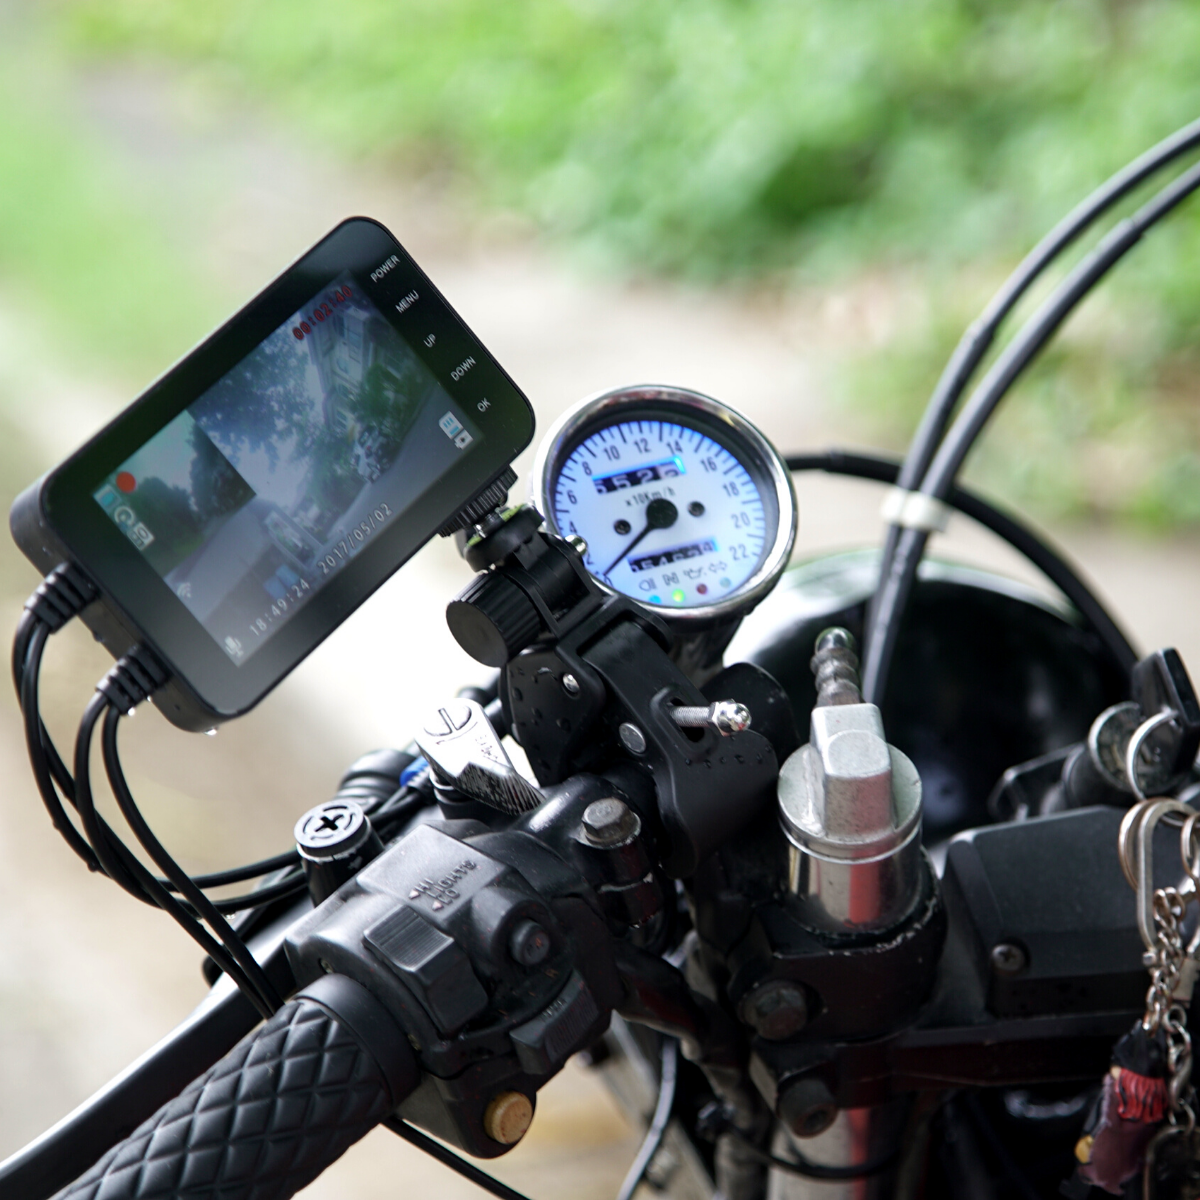 A compact Motorcycle Dual Lens Dash Camera Video Recorder 4 Inch HD 1080P with a water-resistant cell phone attached to the handlebars.